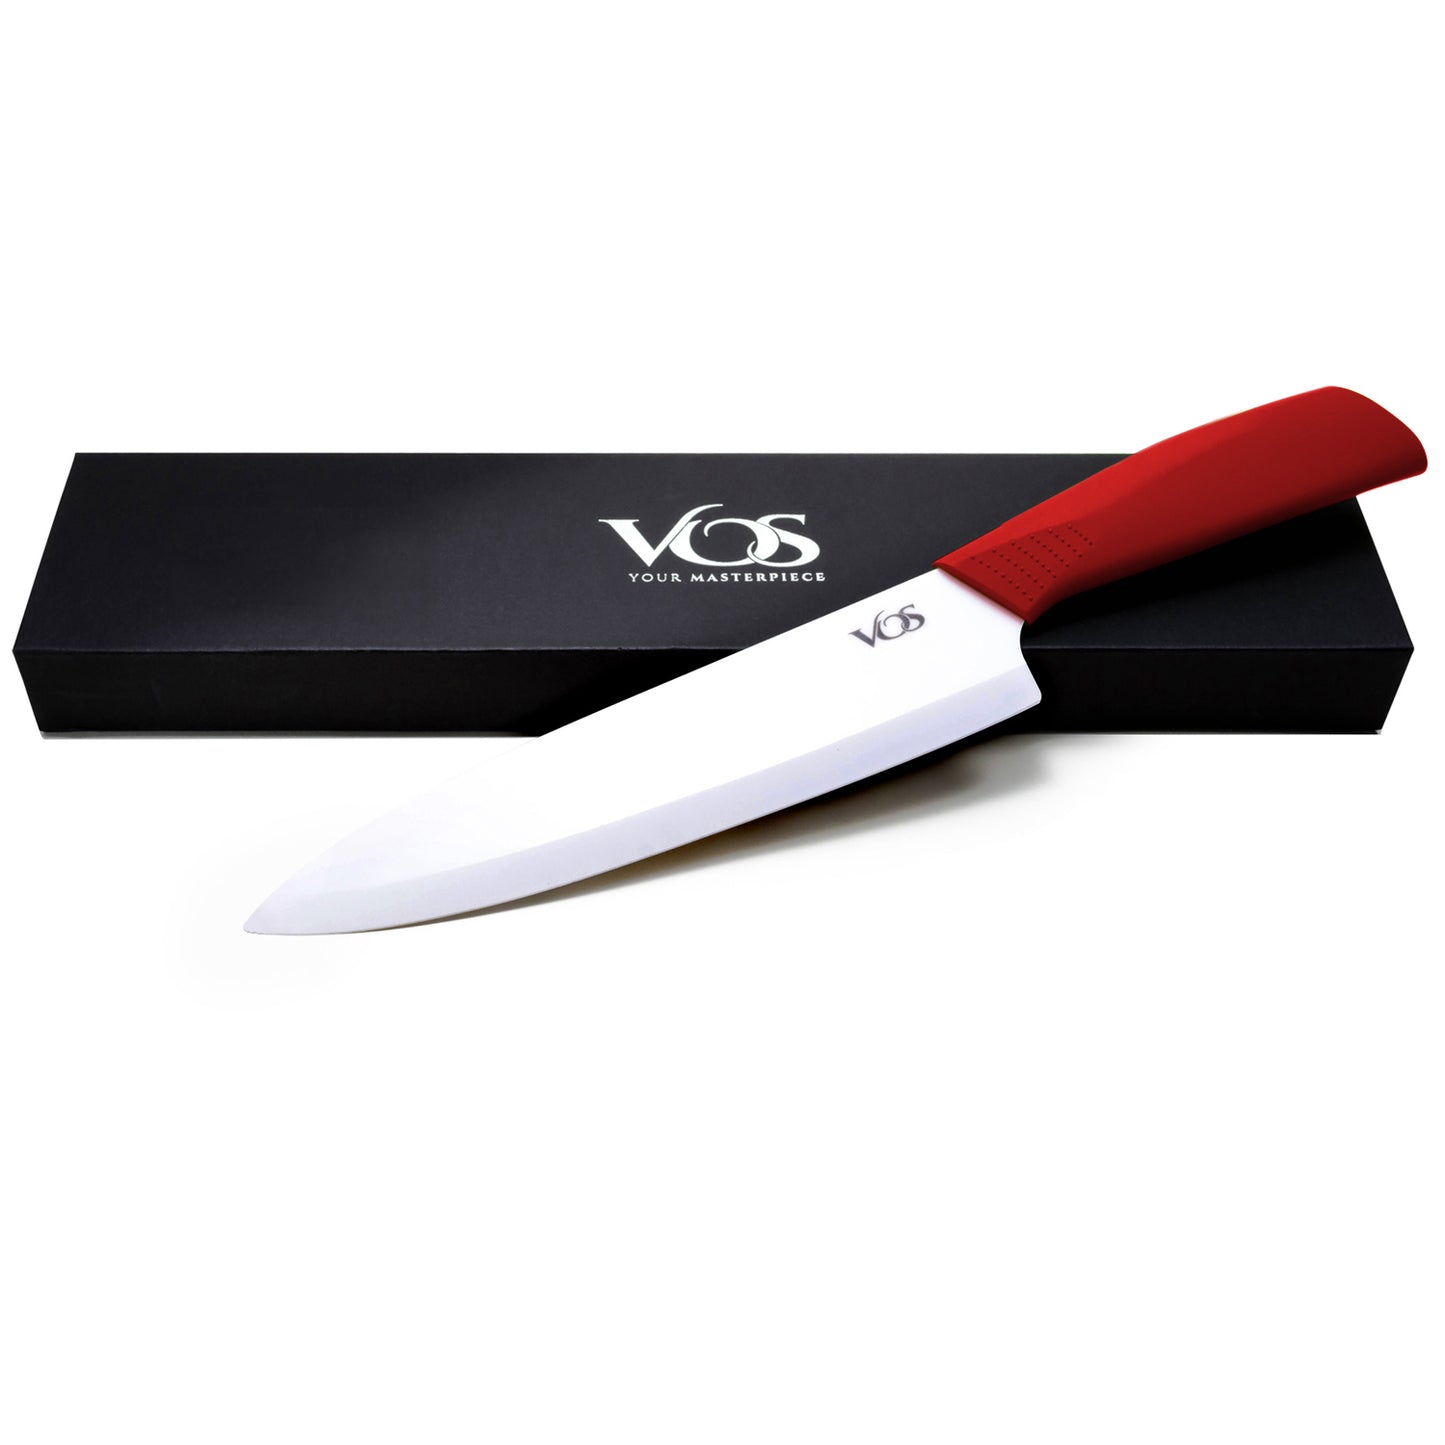 Ceramic Knife 6 5 4 3 inch Kitchen Chef Knives RustProof White Blade  Utility Slicing Paring Fruit Vegetable Cooking Cutter Tool